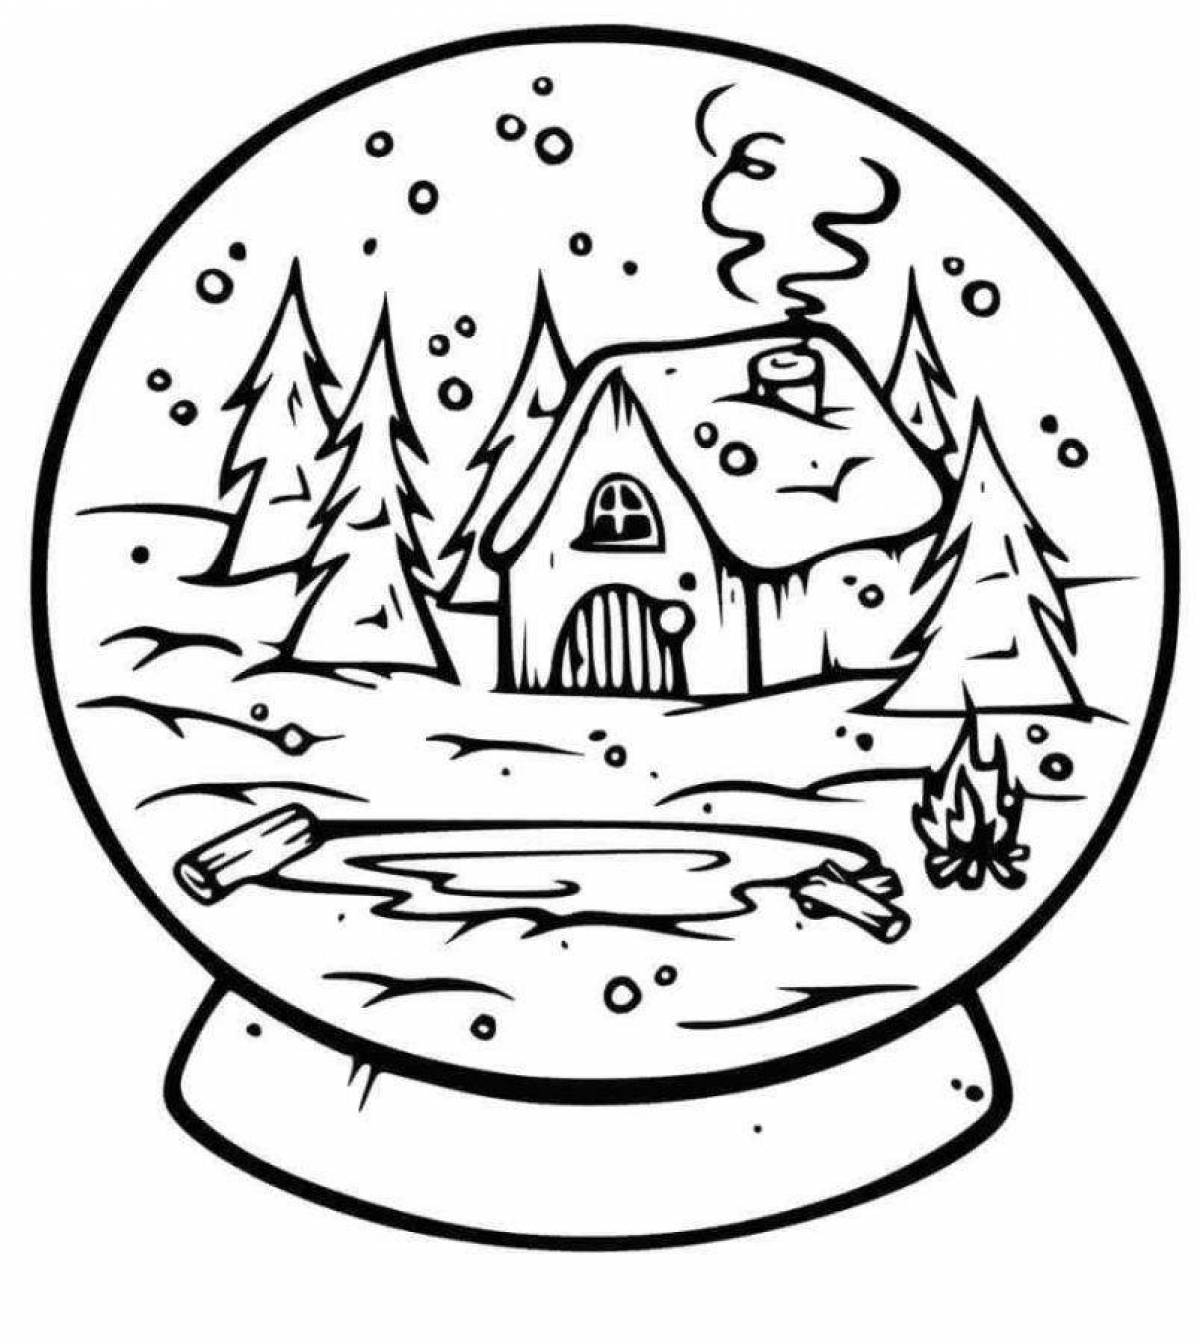 Charming snowball coloring book